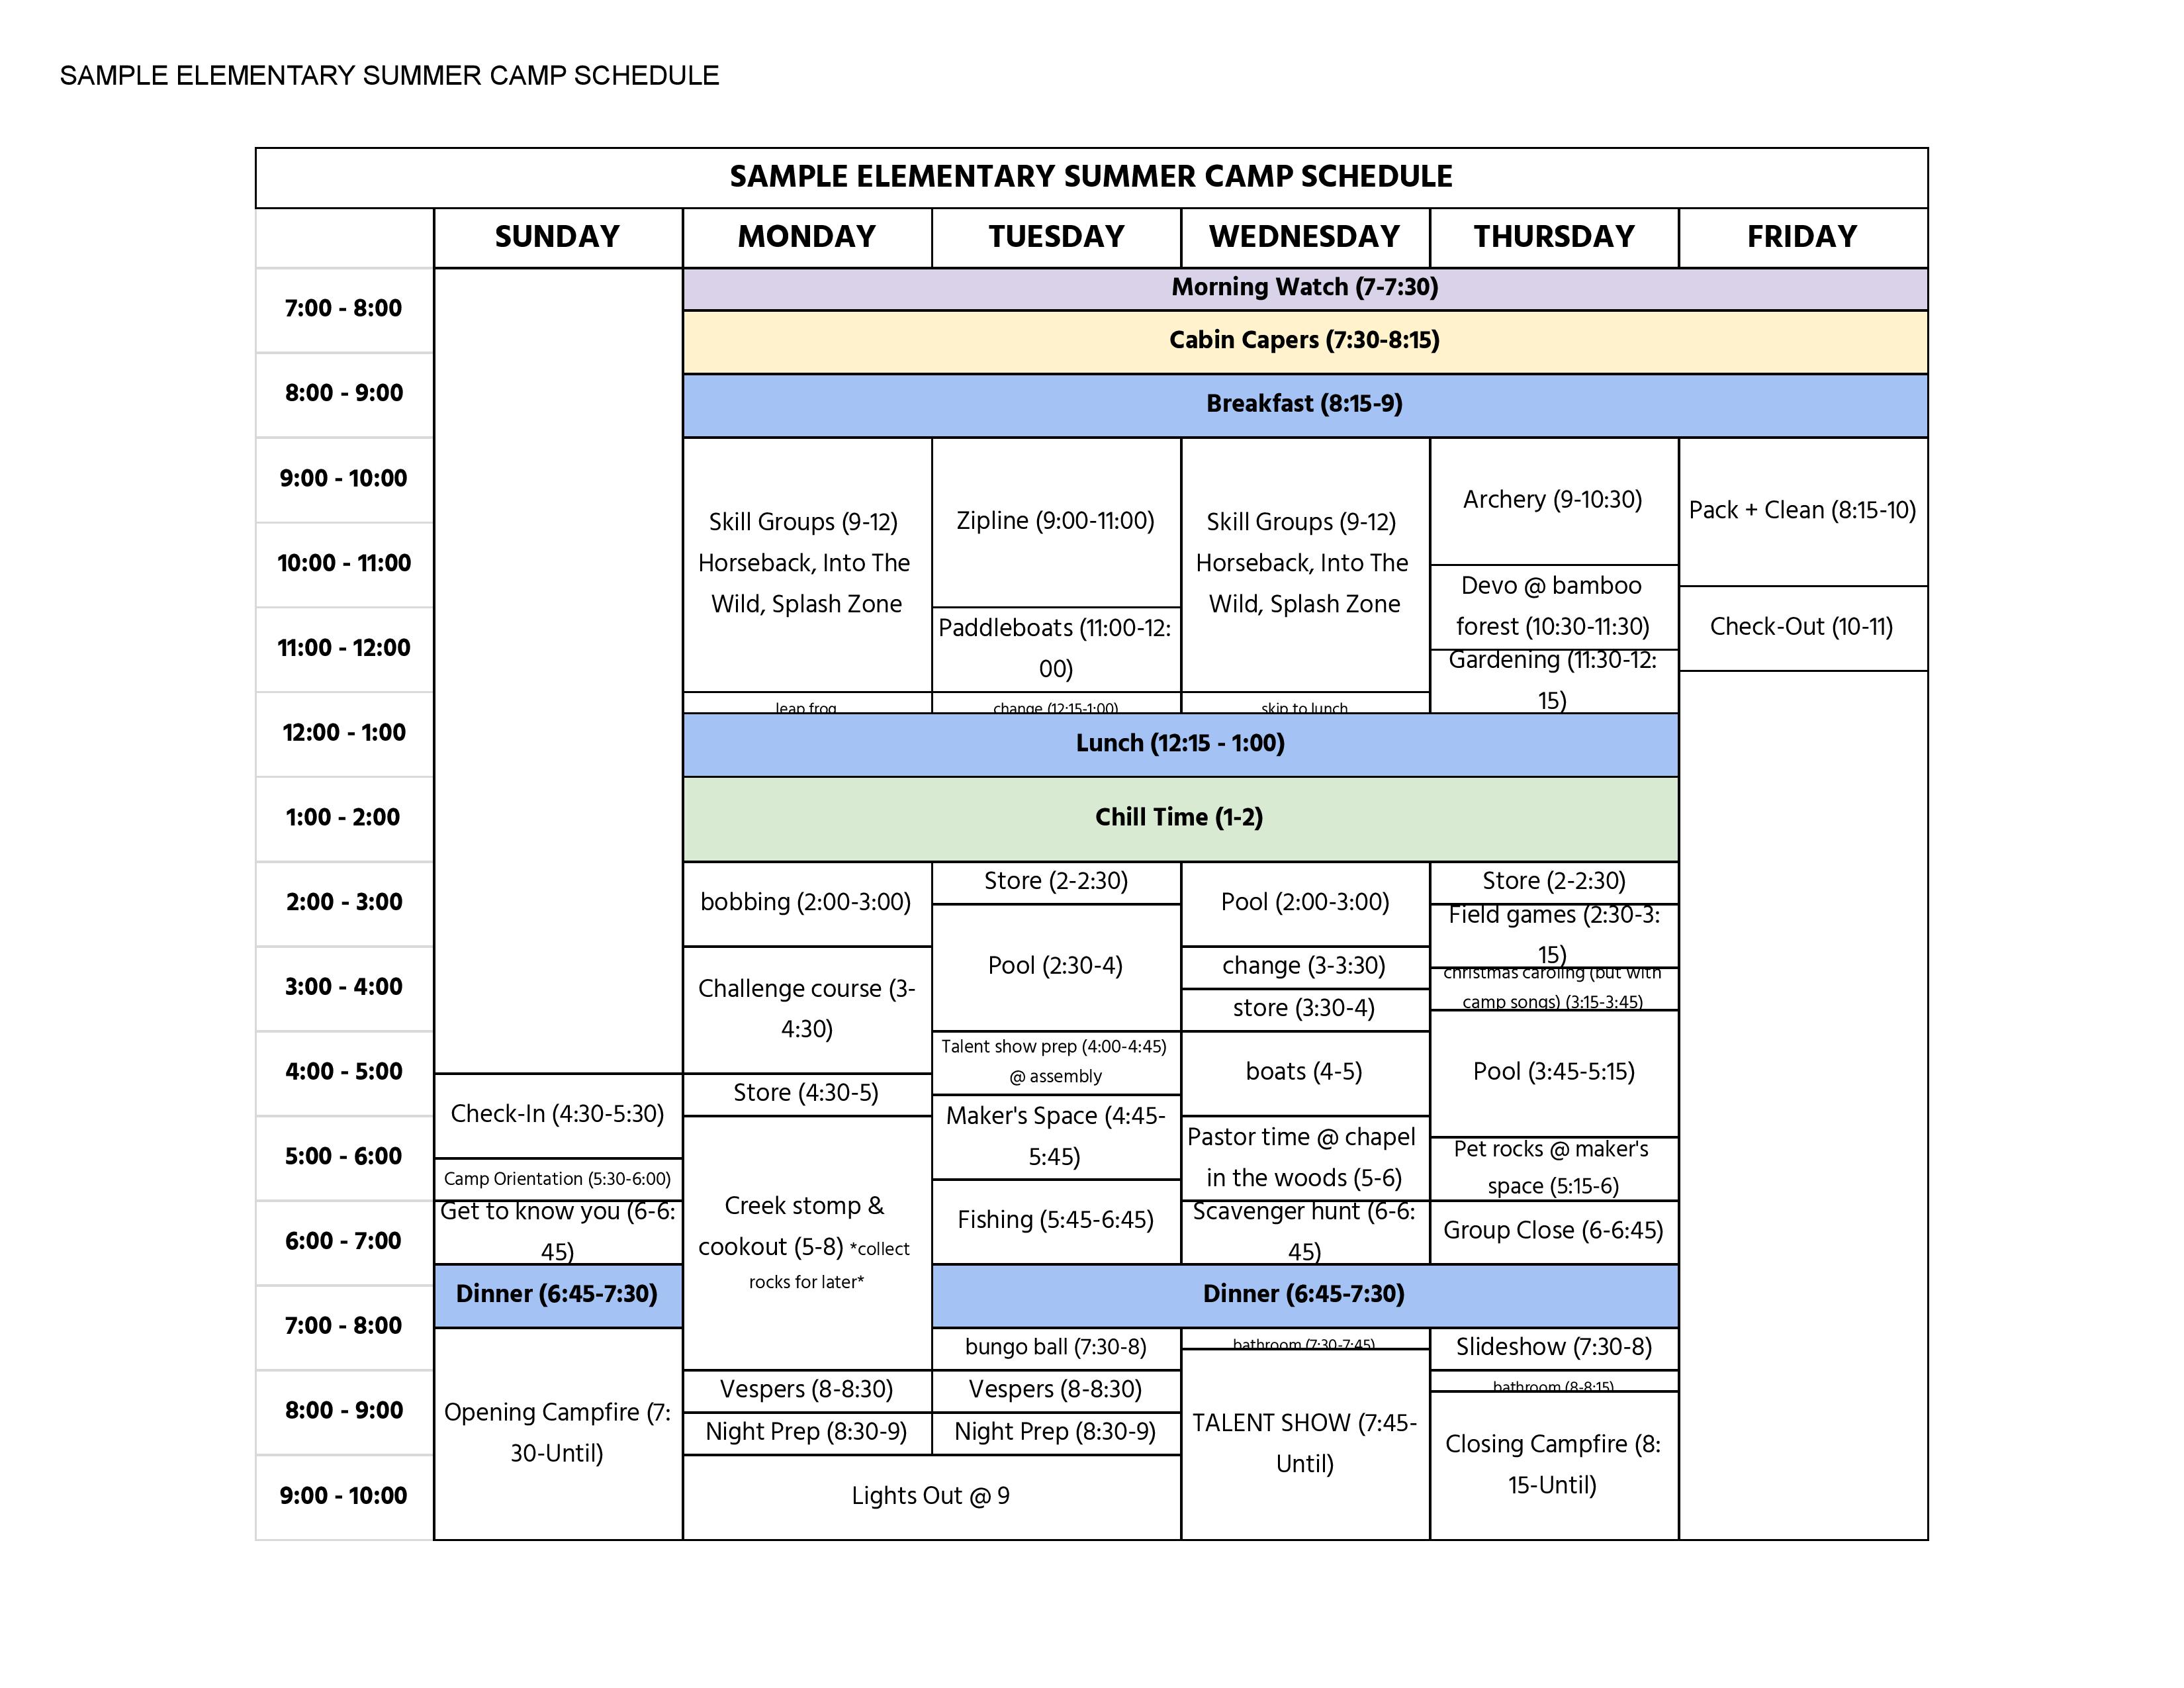 SAMPLE ELEMENTARY SUMMER CAMP SCHEDULE Sheet1 page 001